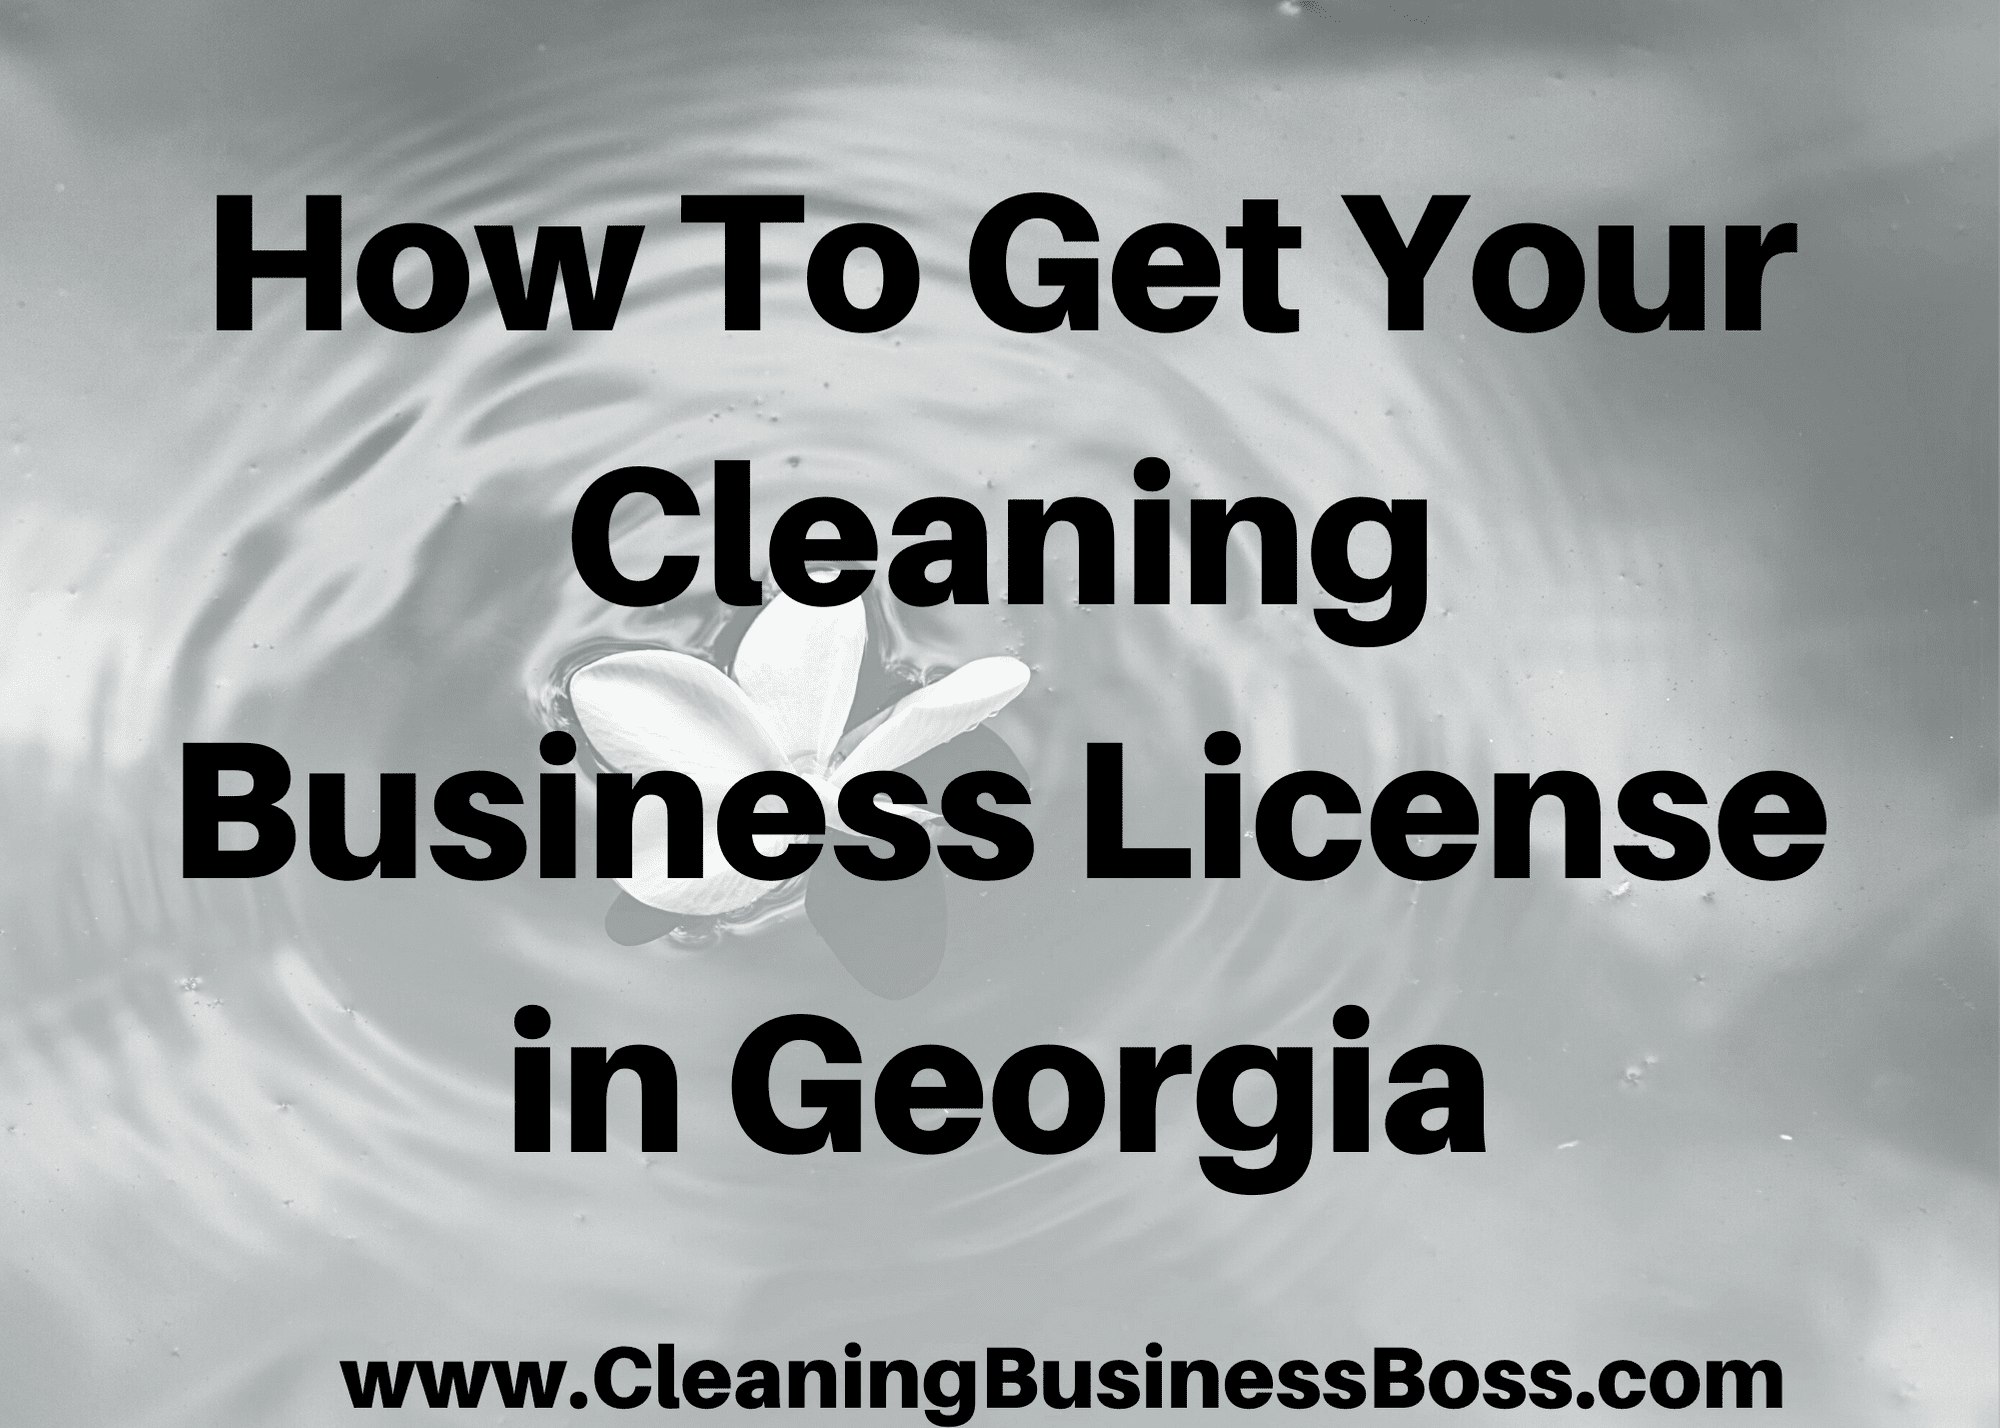 How toget your cleaning business license in Georgia